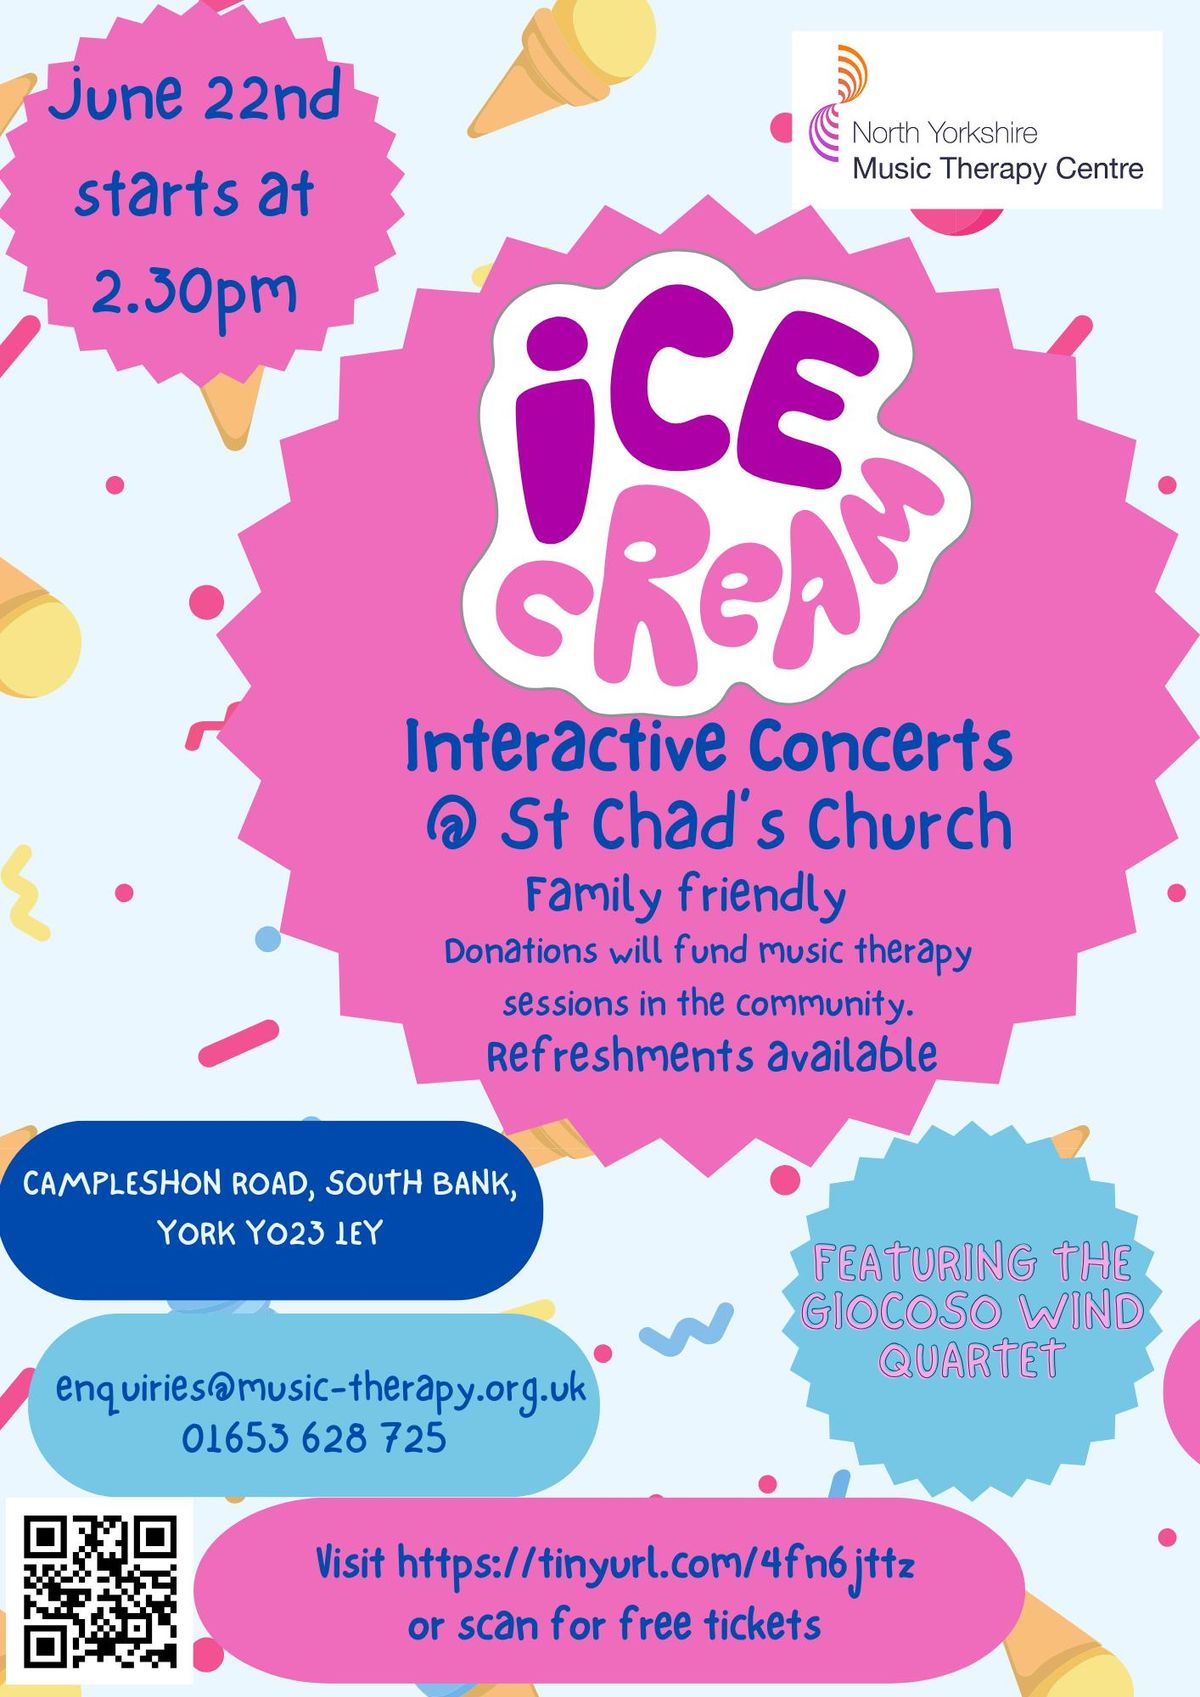 Ice Cream Interactive Concert for Families